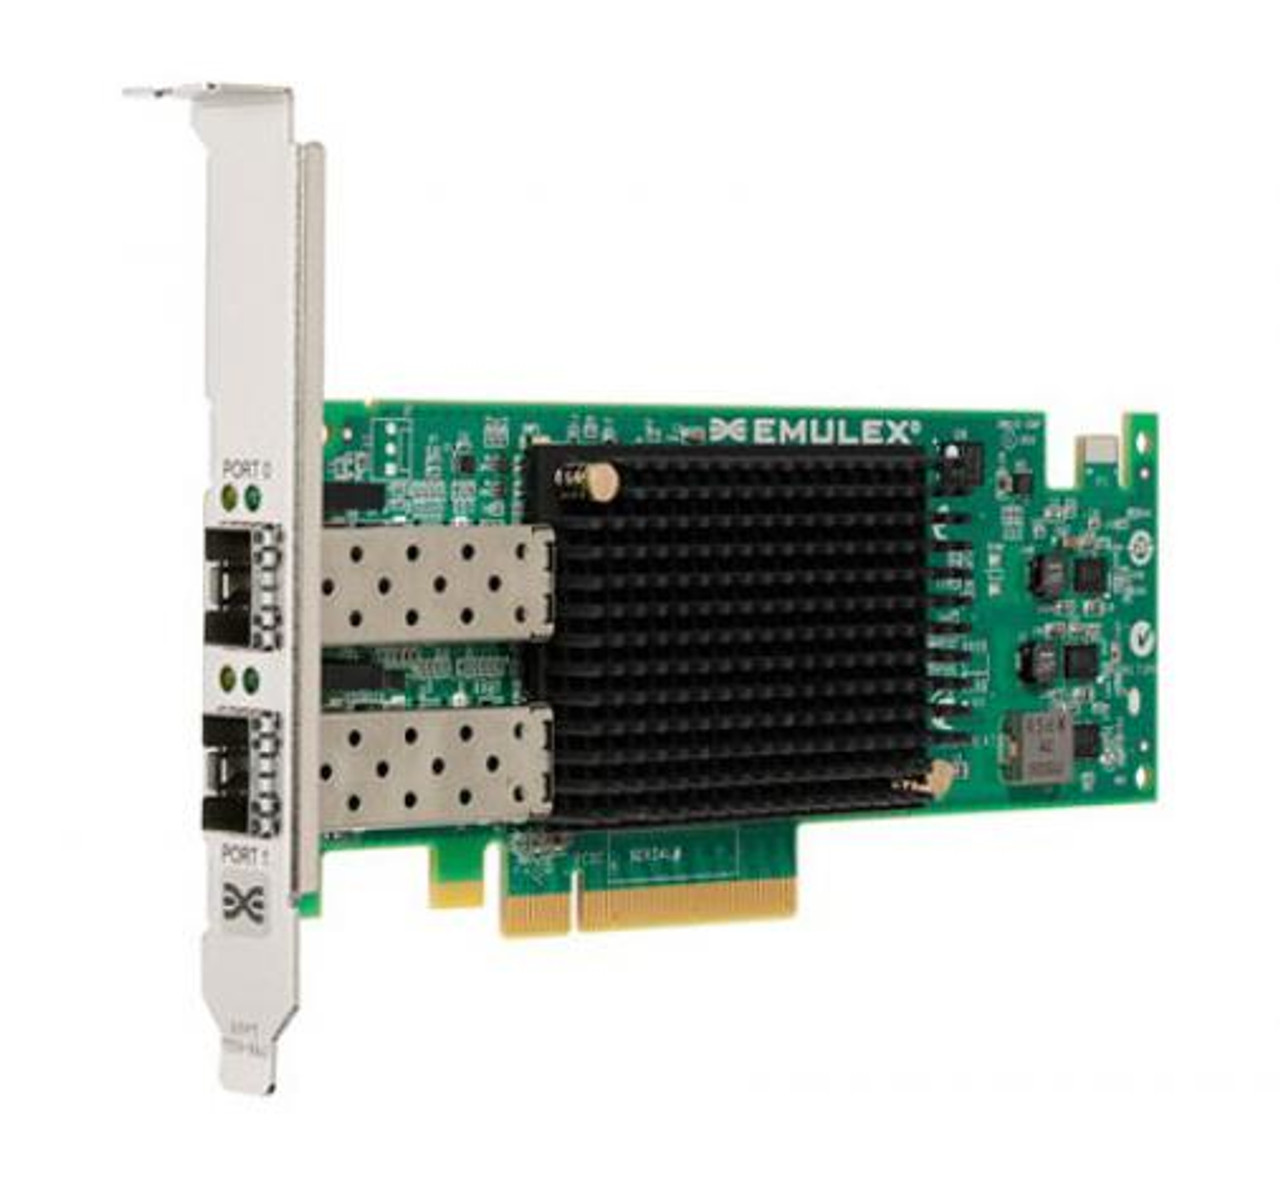 49Y7950-06 IBM Dual-Ports 10Gbps Gigabit Ethernet PCI Express 2.0 x8 Virtual Fabric Network Adapter II by Emulex for System x